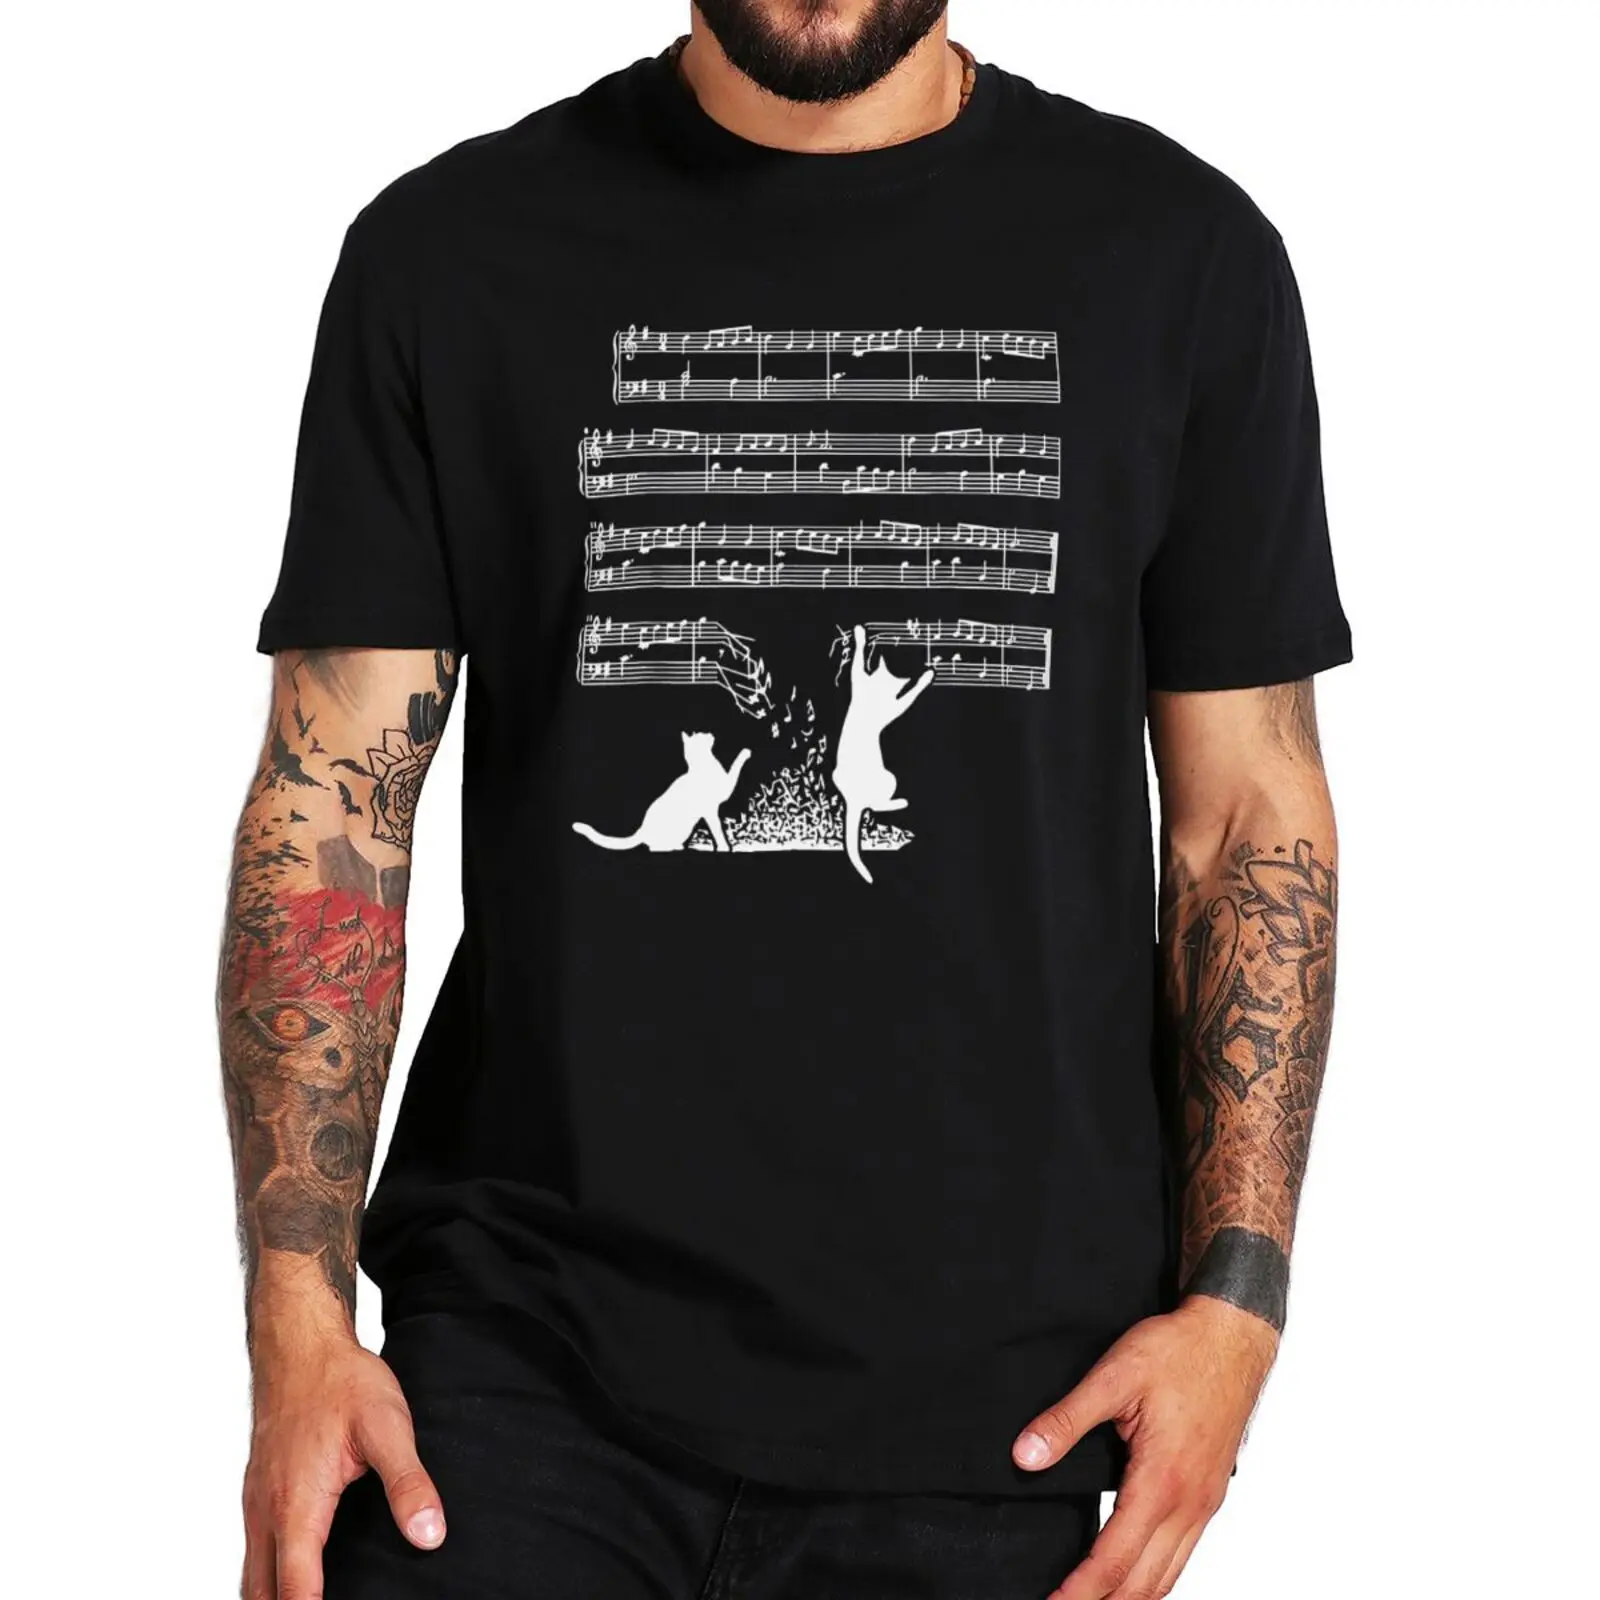 

Cat With Music T Shirt Cute Kitten Playing With Symphony Themed Graphic T-shirt Male Female High Quality 100% Cotton Tops Tee